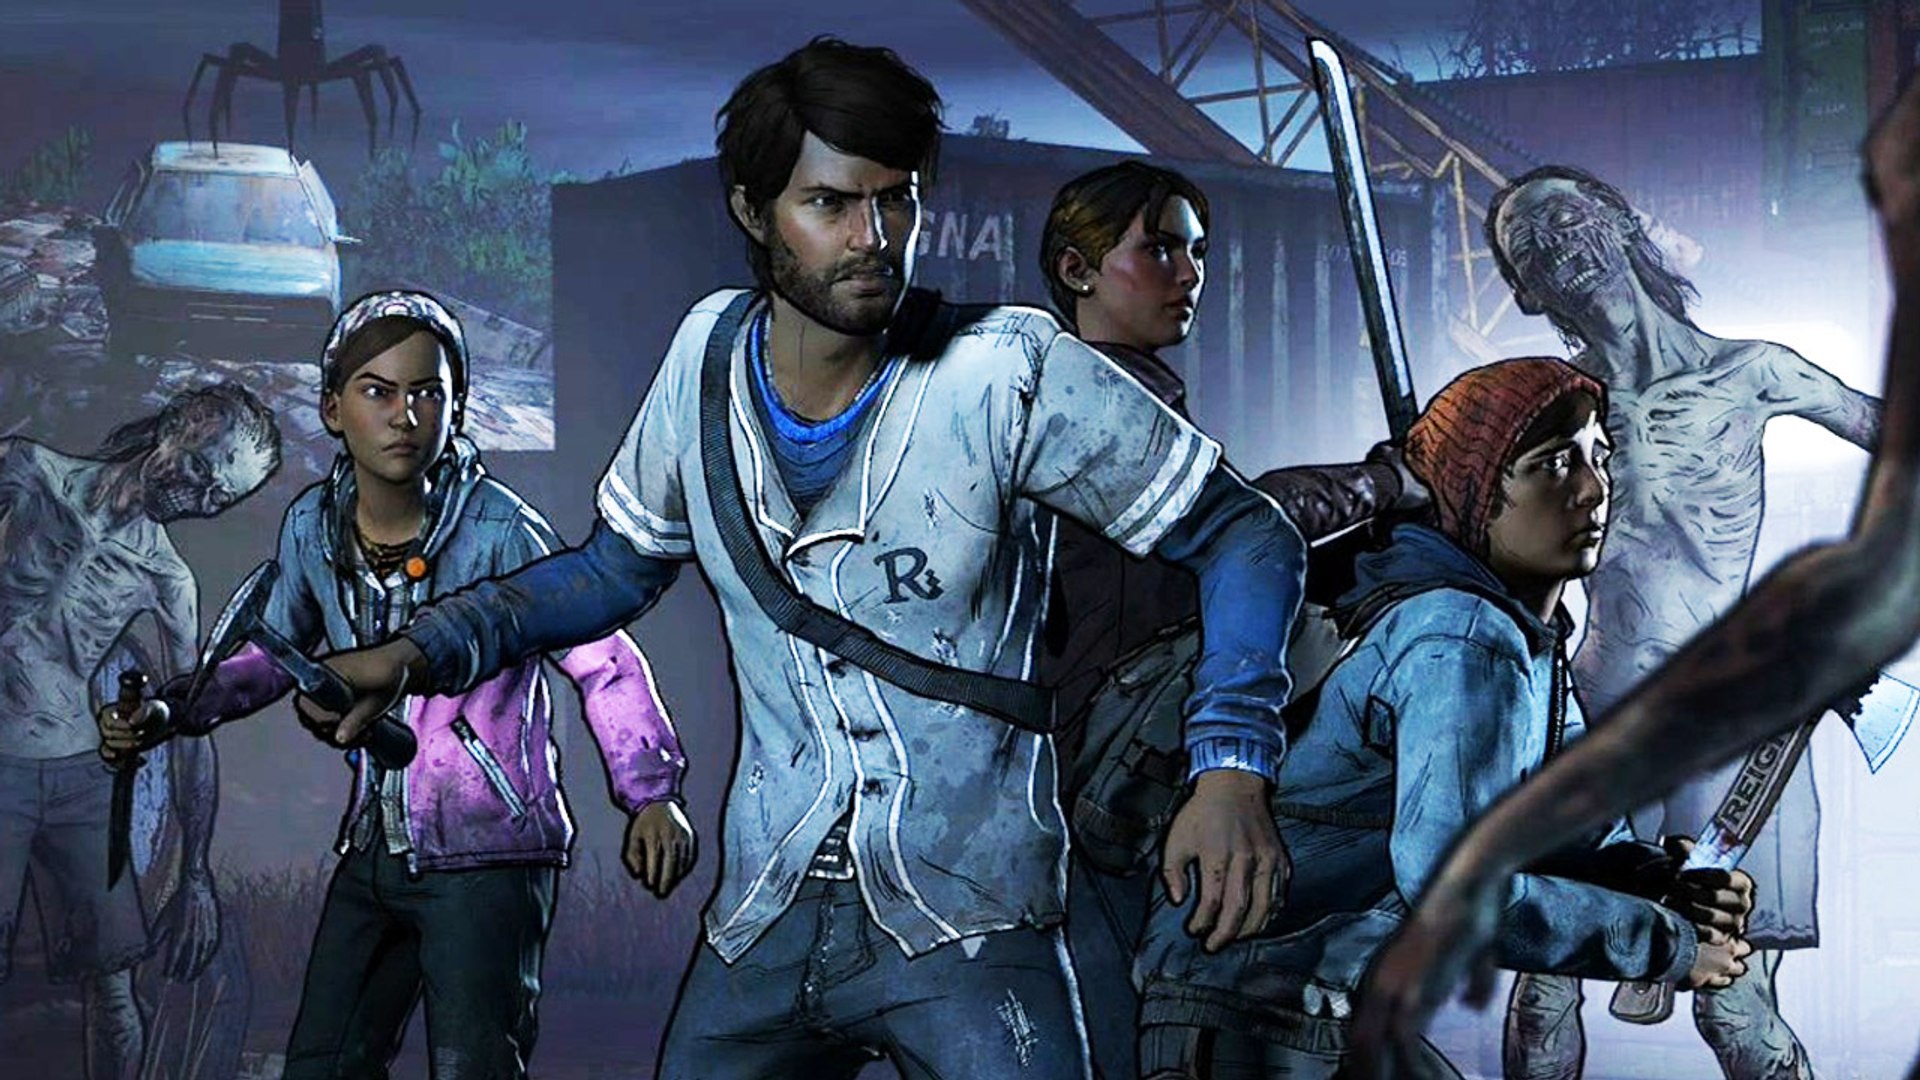 TWD A New Frontier. The Walking Dead: a New Frontier - Episode 1. The Walking Dead Нью Фронтир. Ходячие the New Frontier. Как пройти игру dead